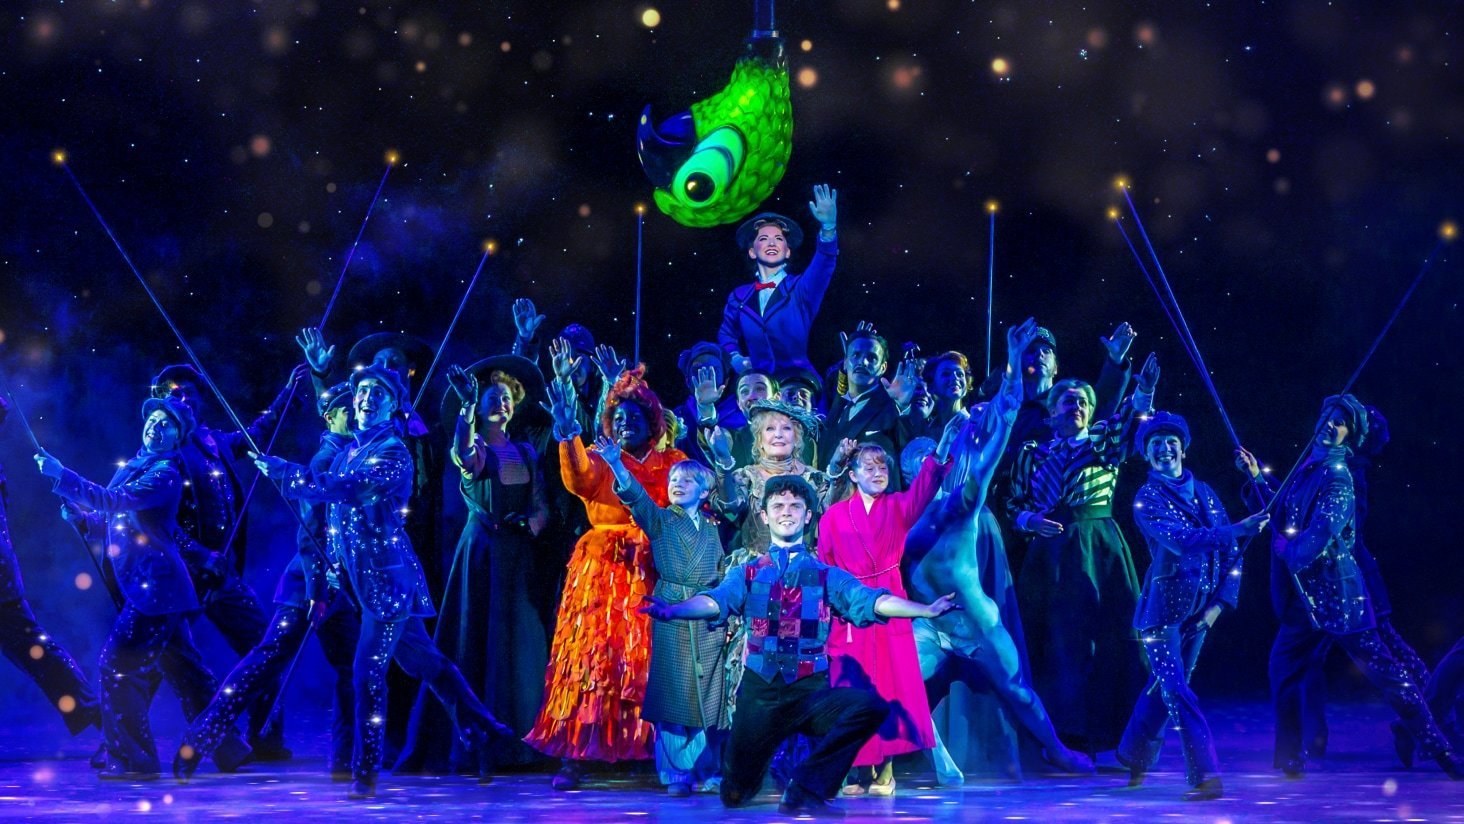 Q&A with Mary Poppins Choreographer, Stephen Mear